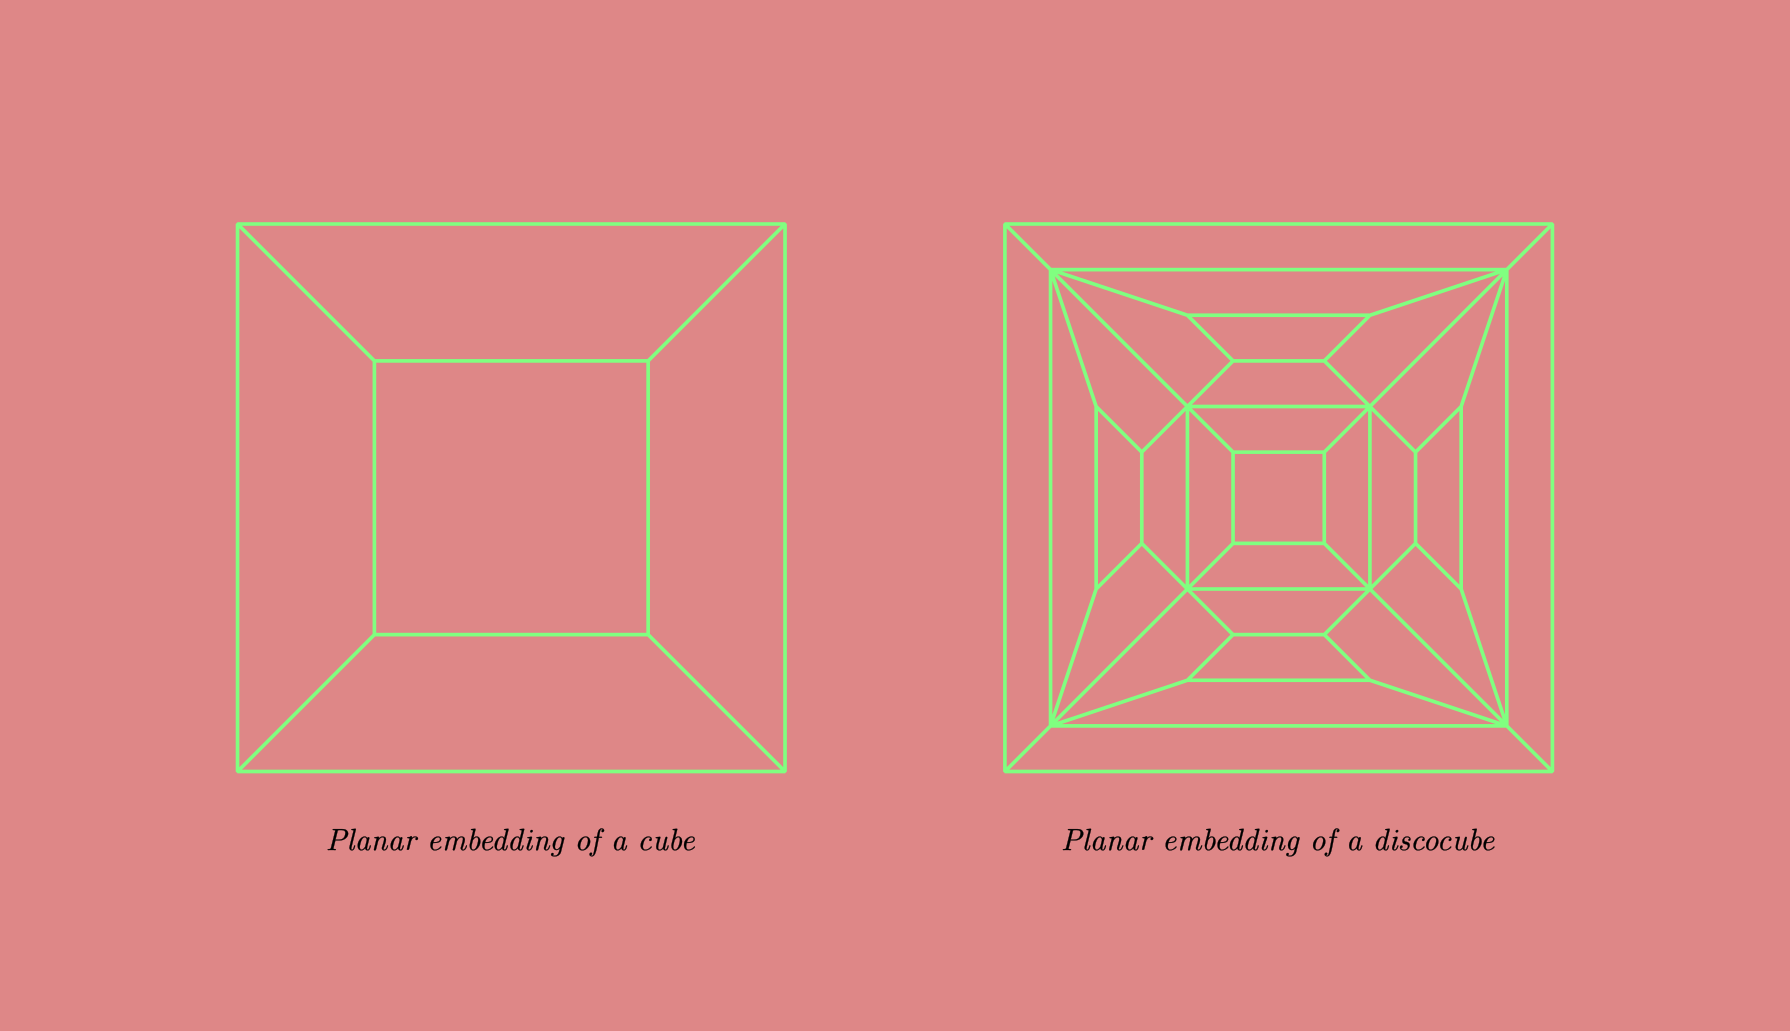 Planar embedding of Cube and Discocubes